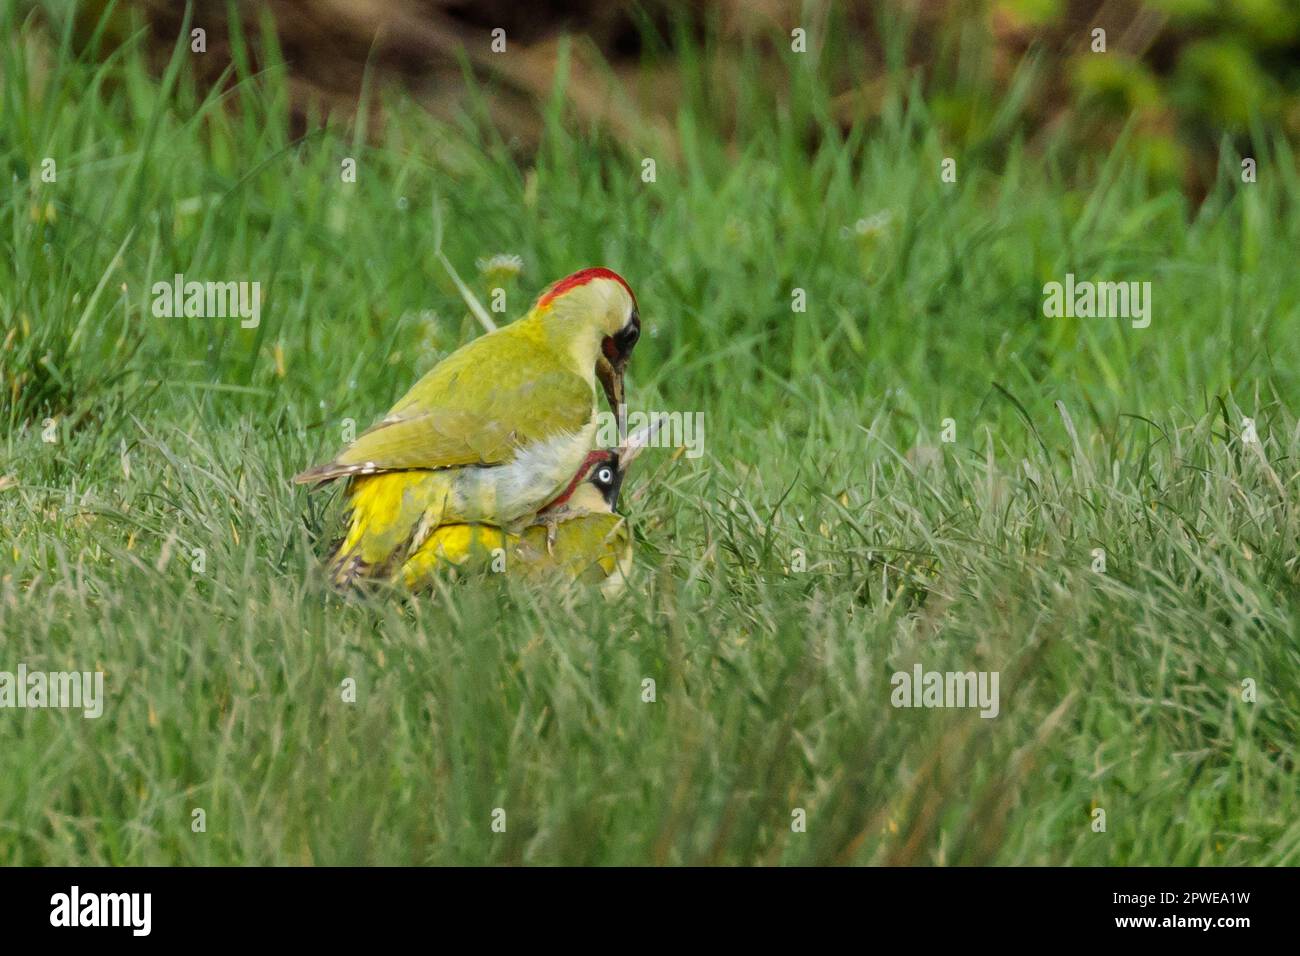 Male and Female European Green Woodpeckers, Picus viridis, mating on grass. Photo by Amanda Rose/Alamy Stock Photo